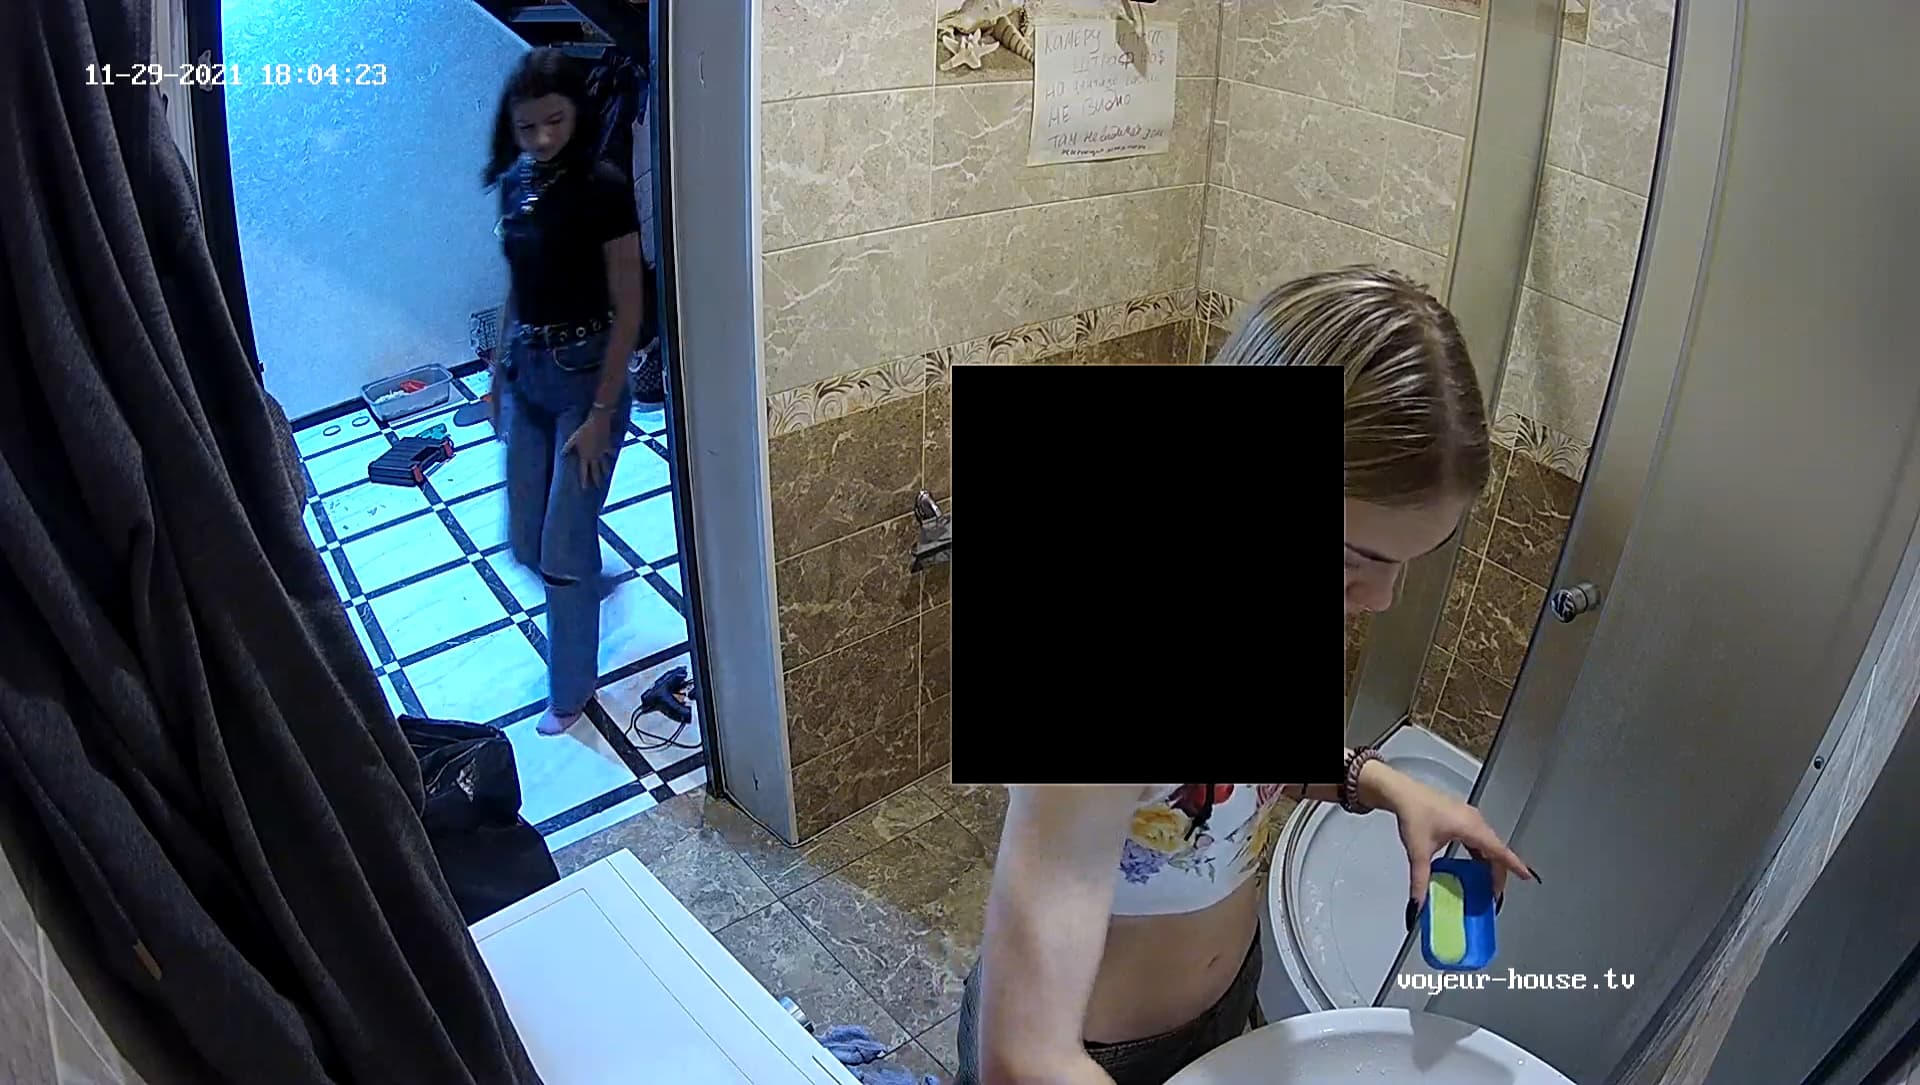 Should toilet cams be banned? - Your Feedback and Ideas picture